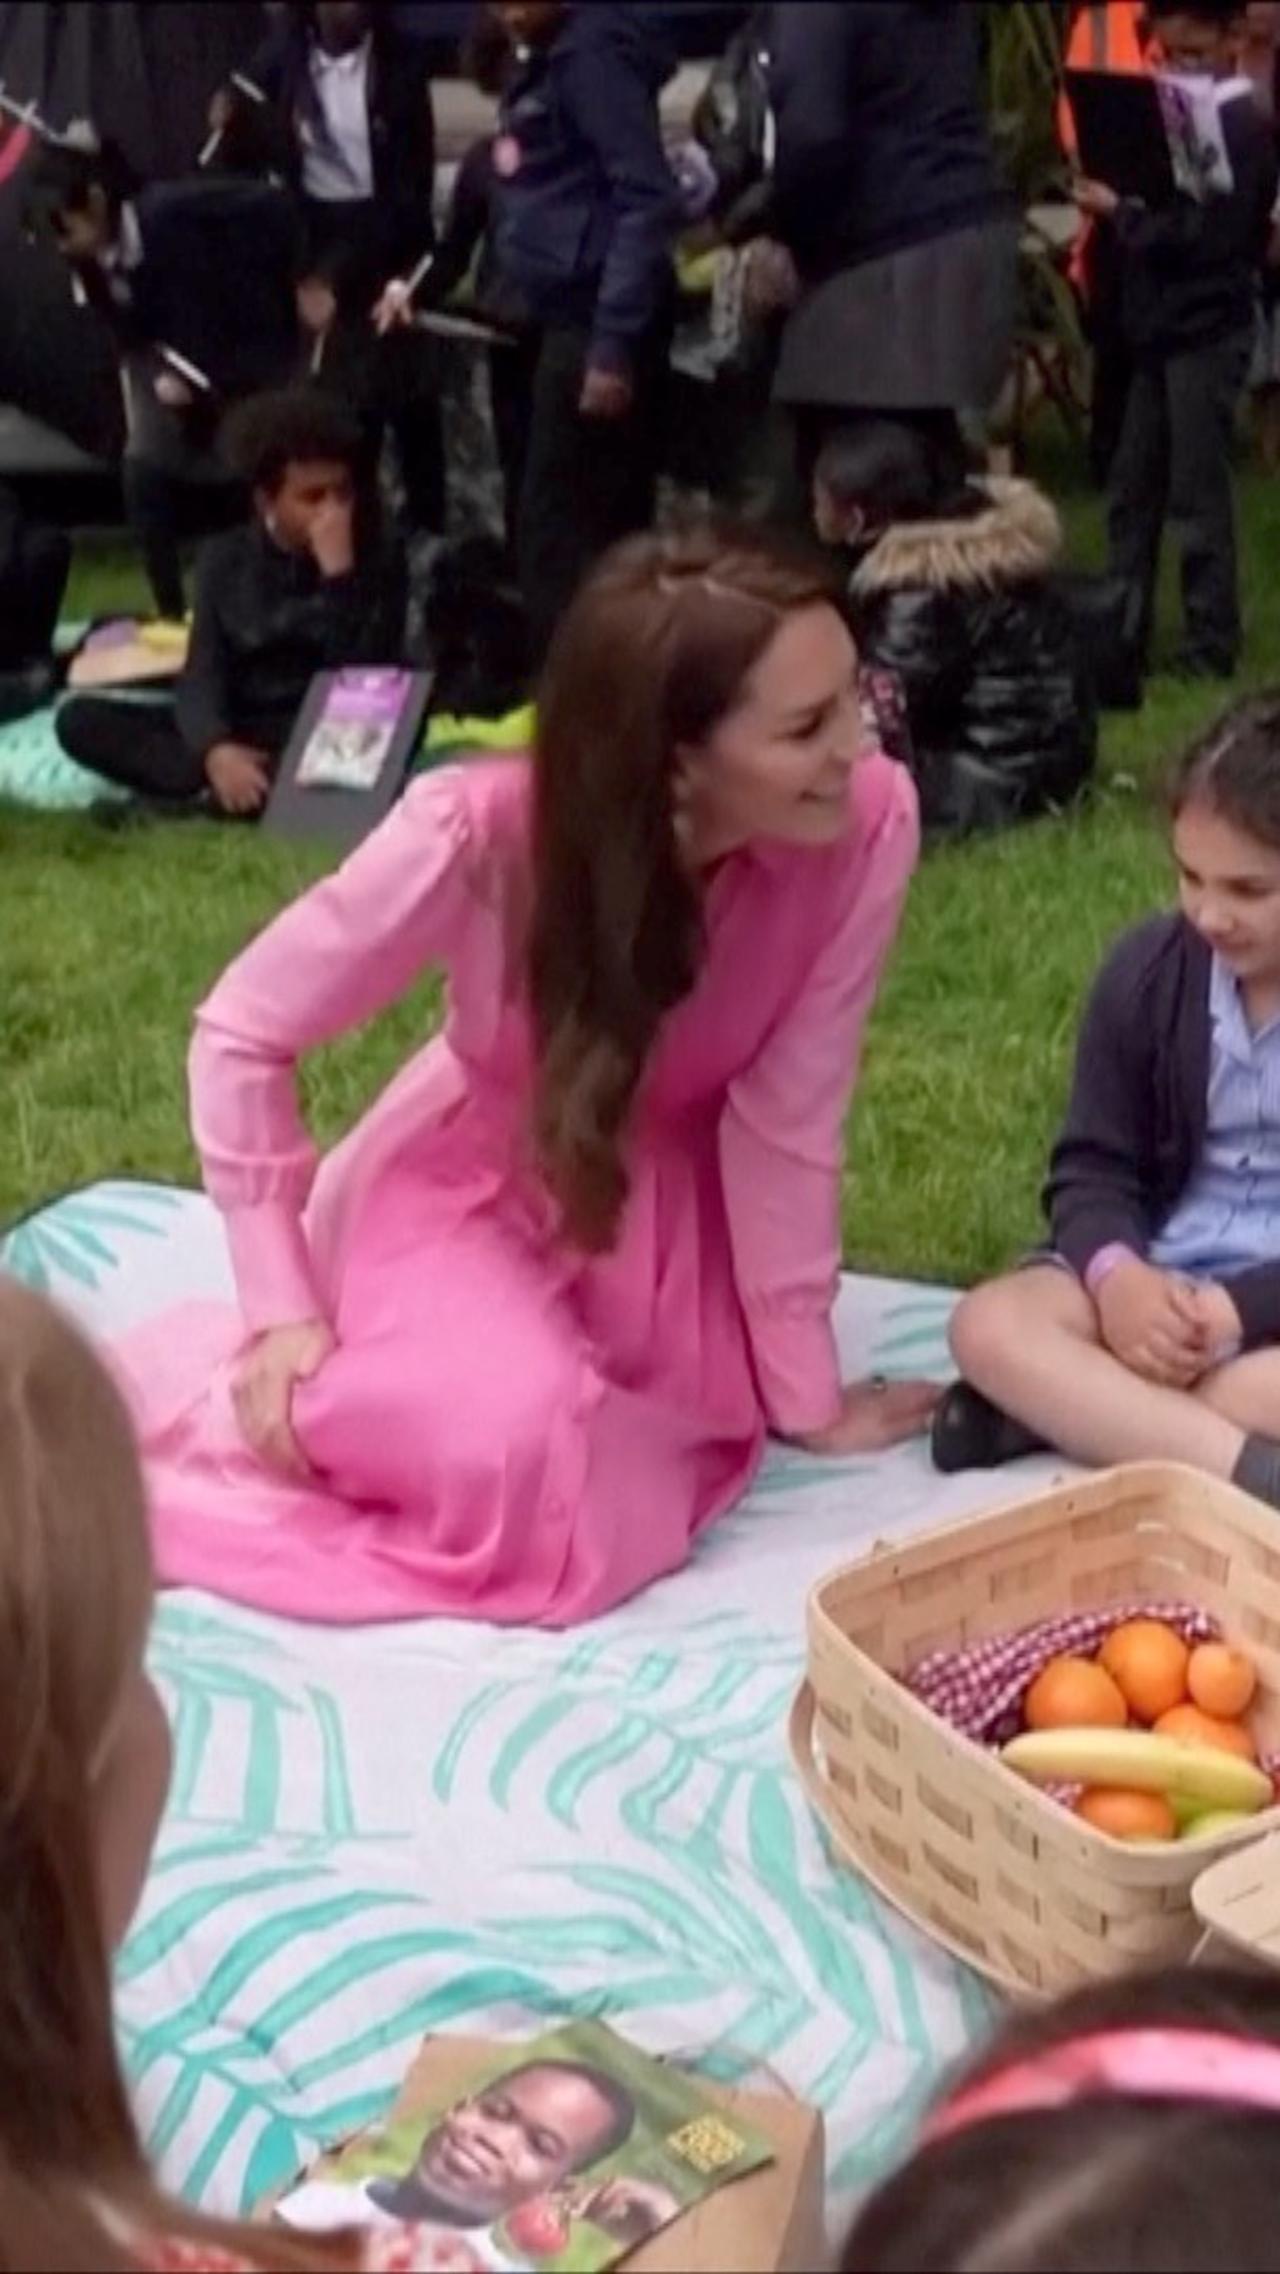 Royal Engagements Reveal Princess Kate Candid in Conversation With Children